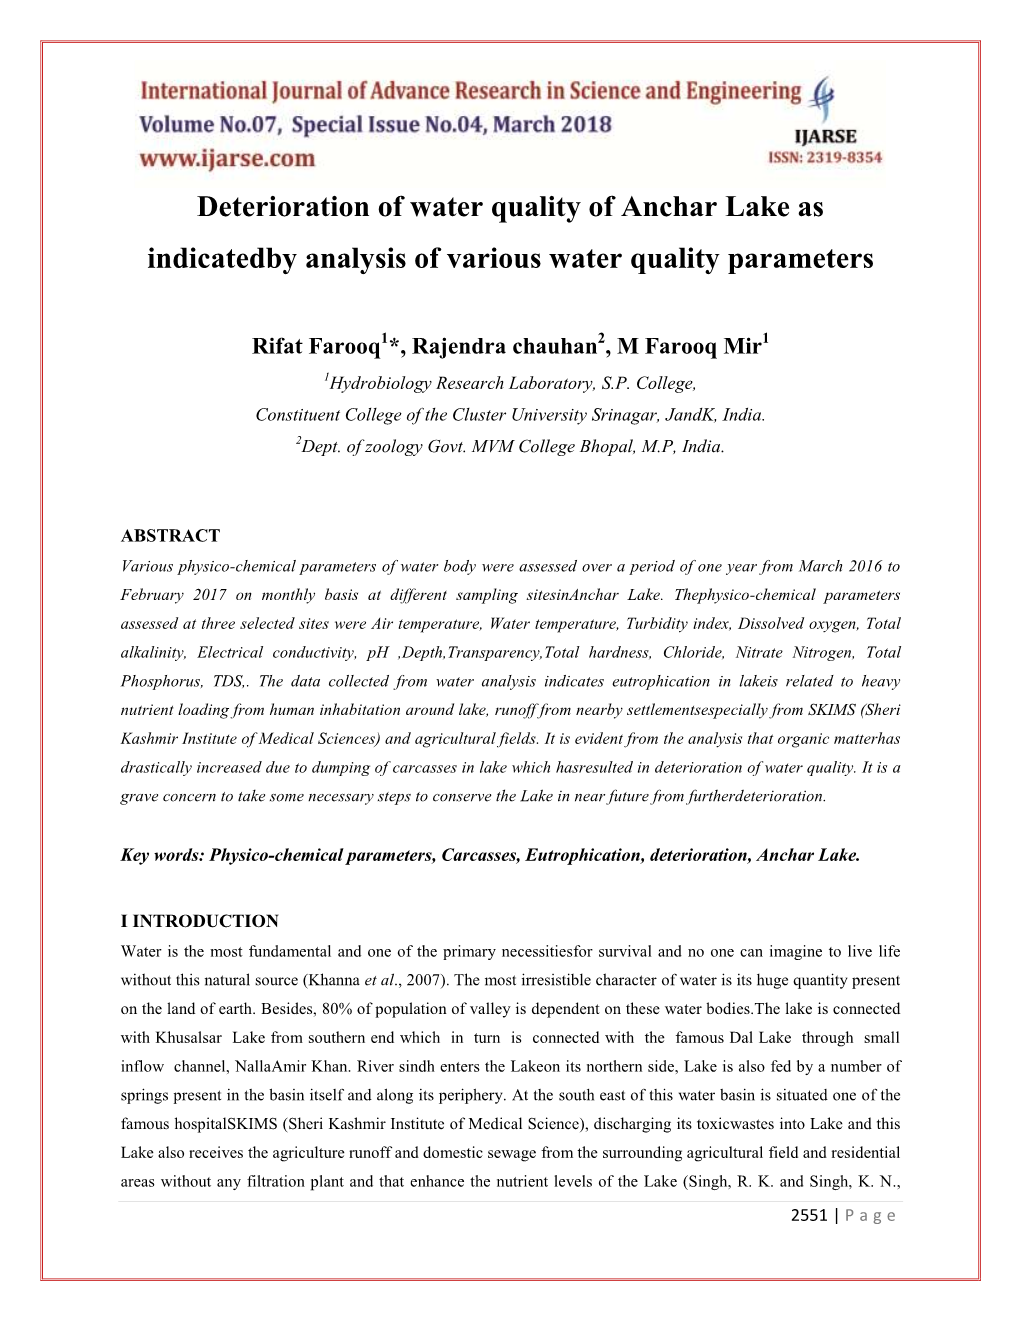 Deterioration of Water Quality of Anchar Lake As Indicatedby Analysis of Various Water Quality Parameters